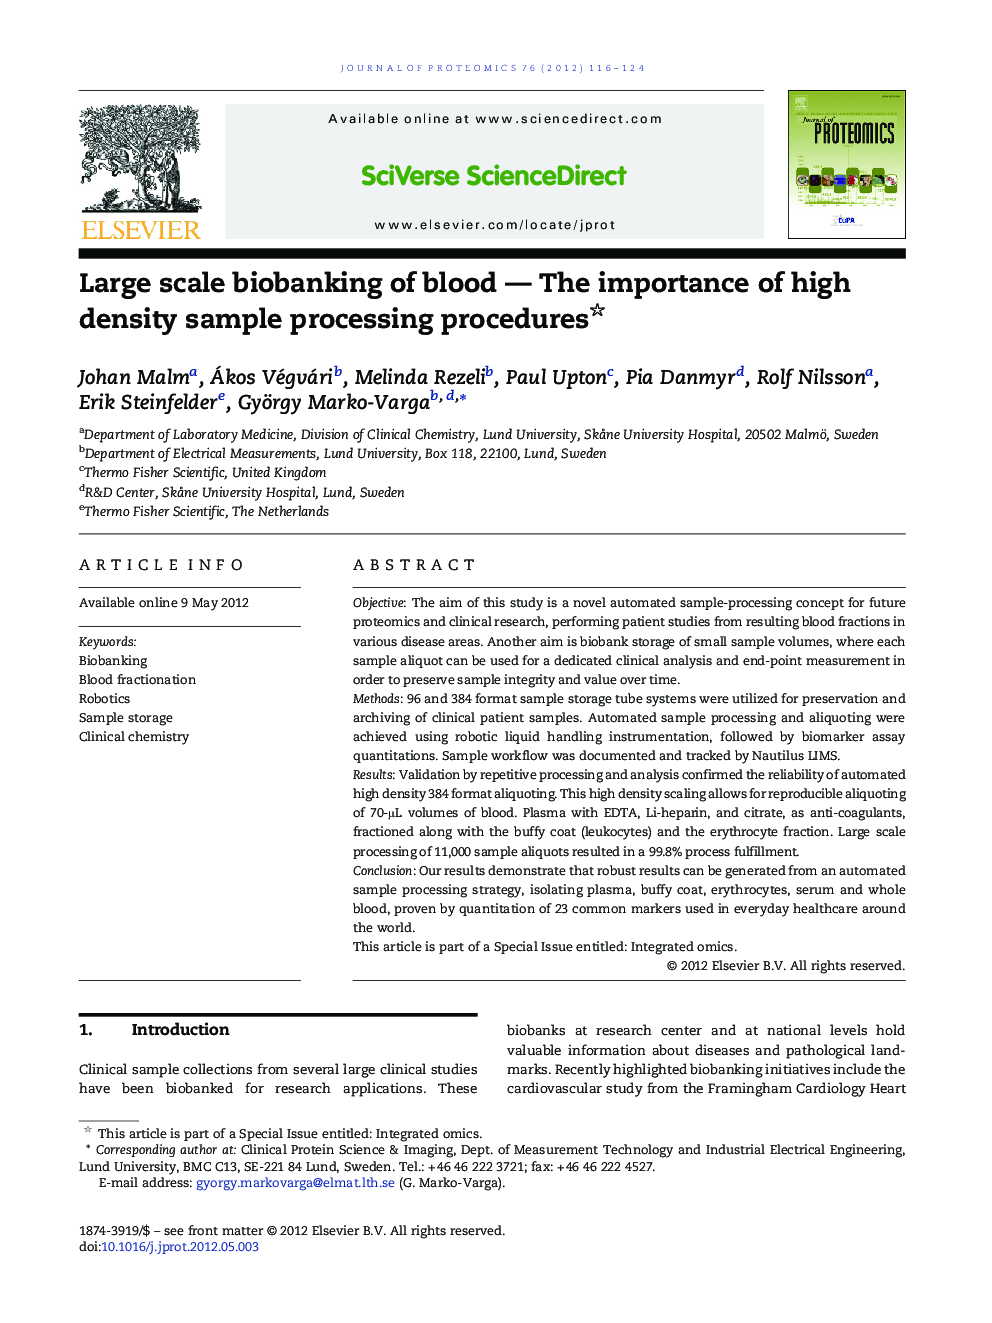 Large scale biobanking of blood - The importance of high density sample processing procedures